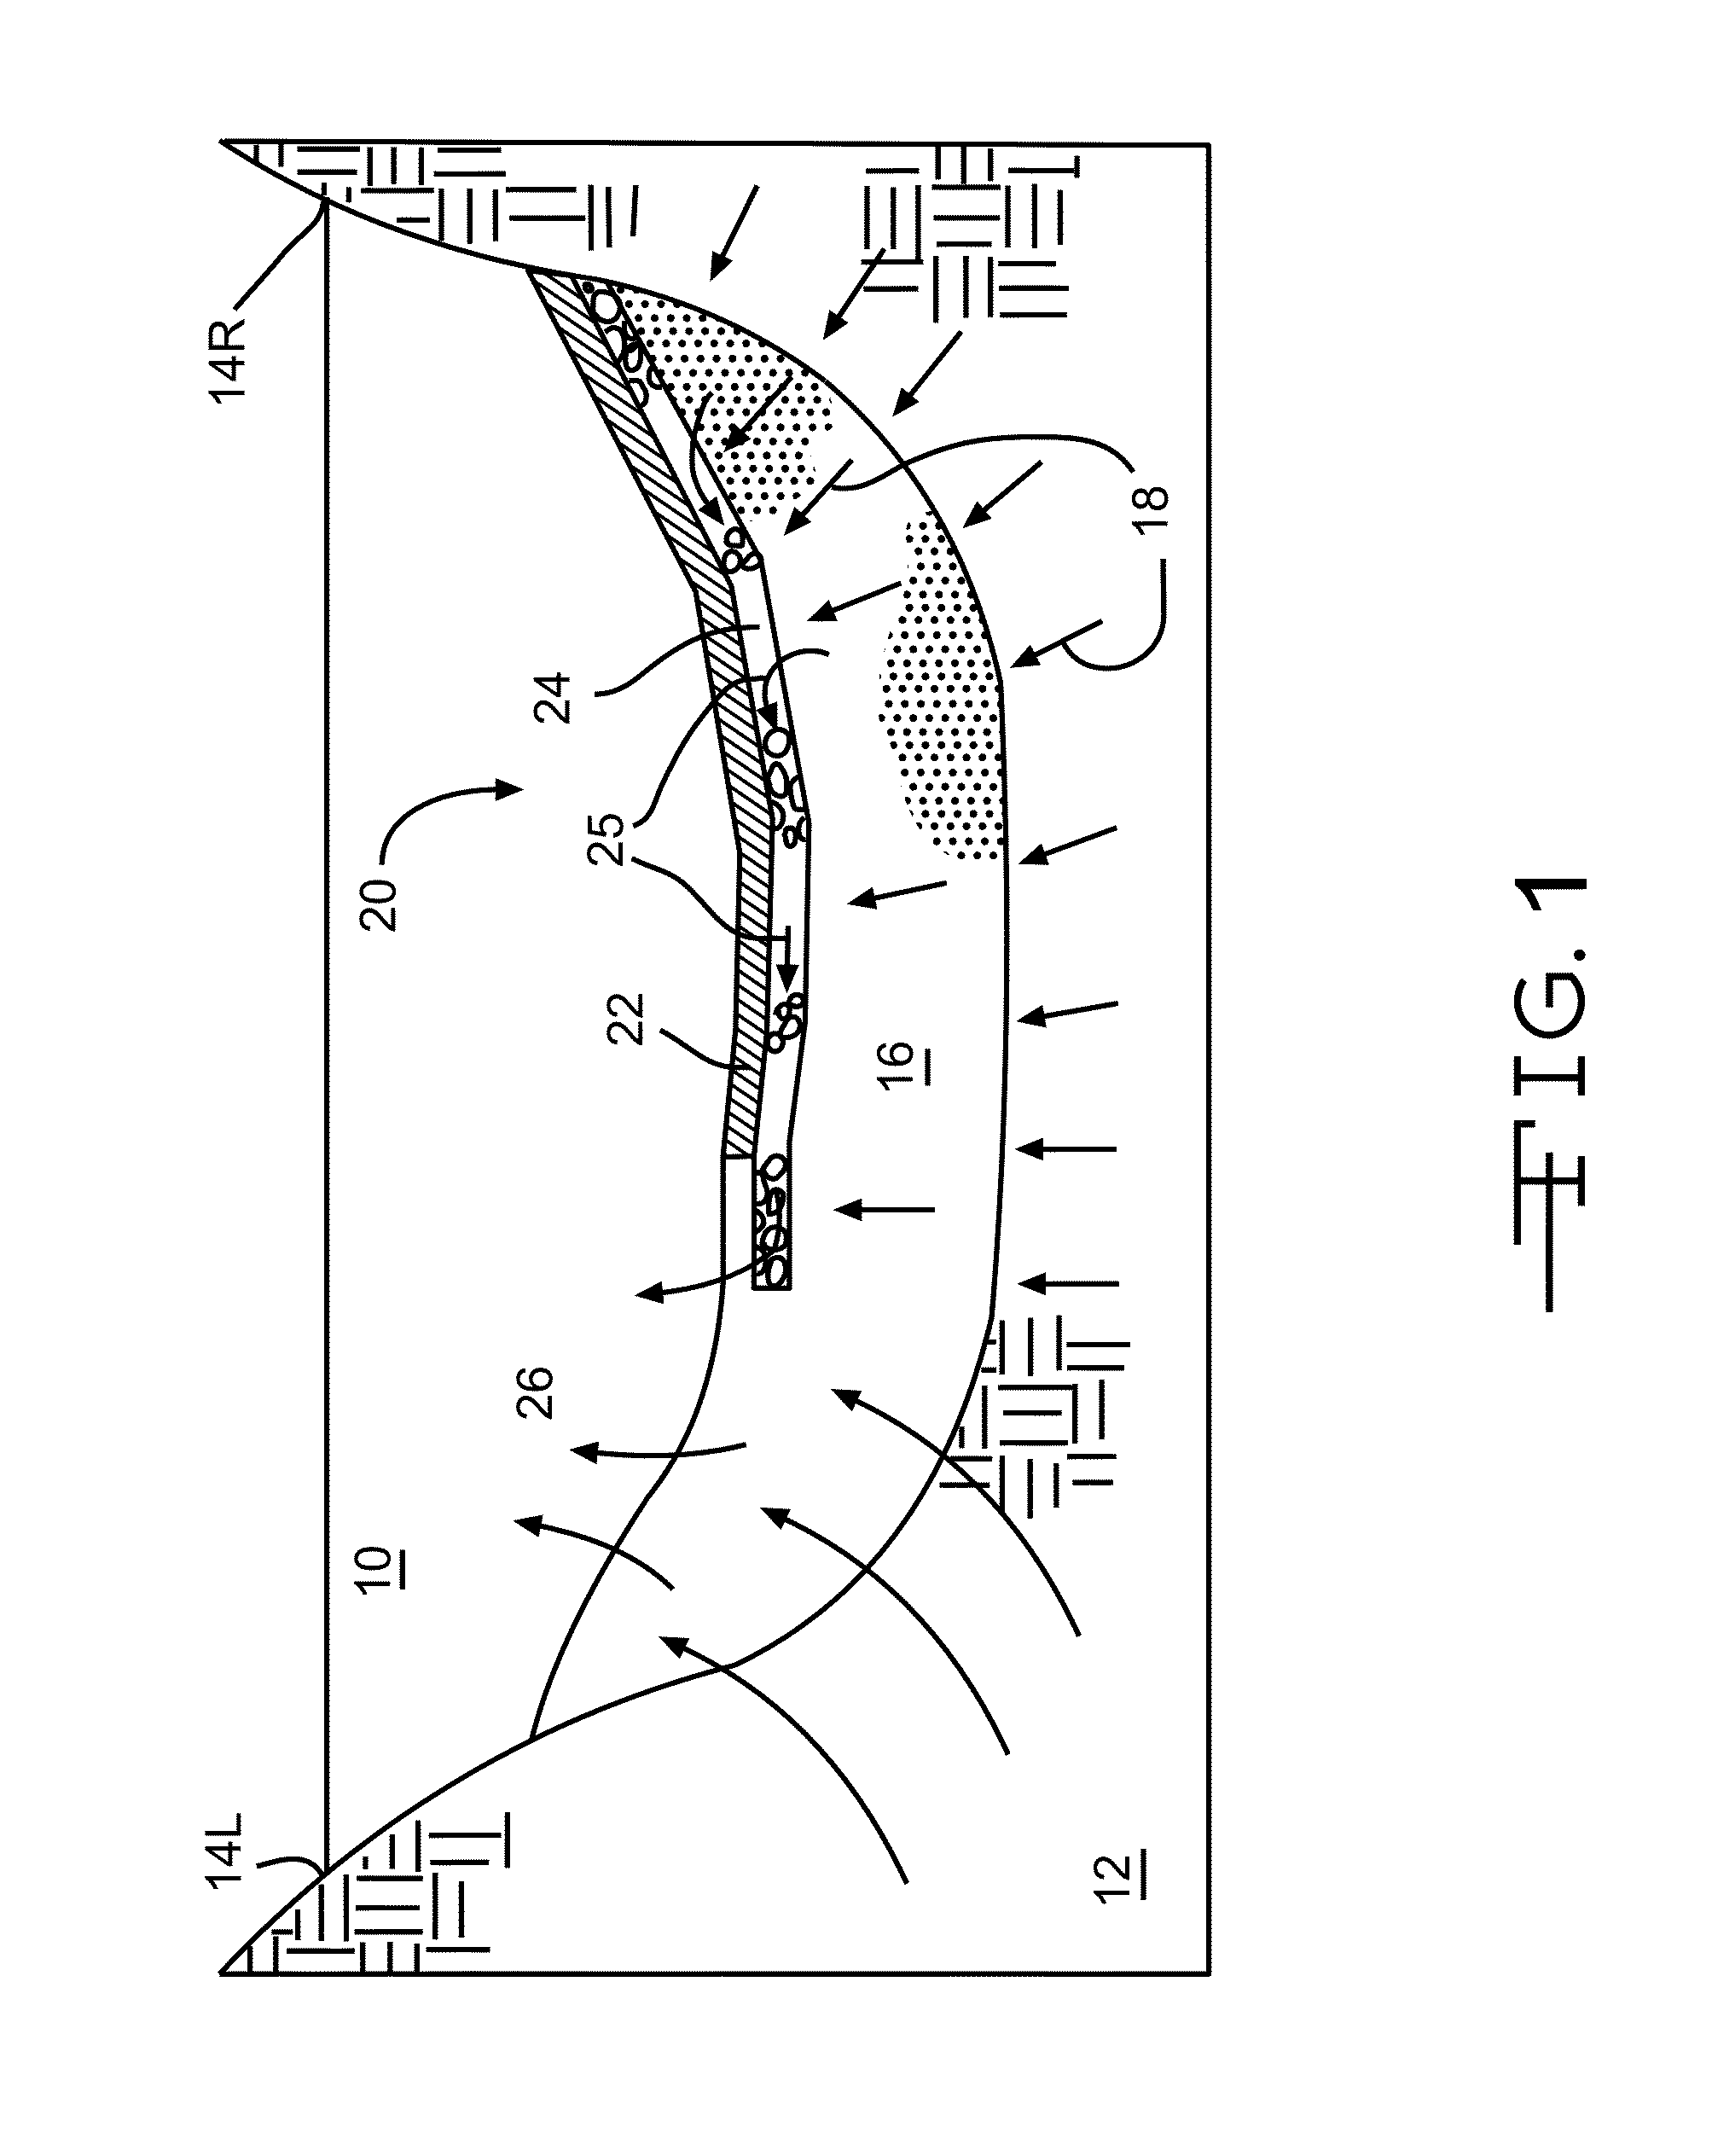 Reactive Treatment Cell and Systems For Environmental Remediation